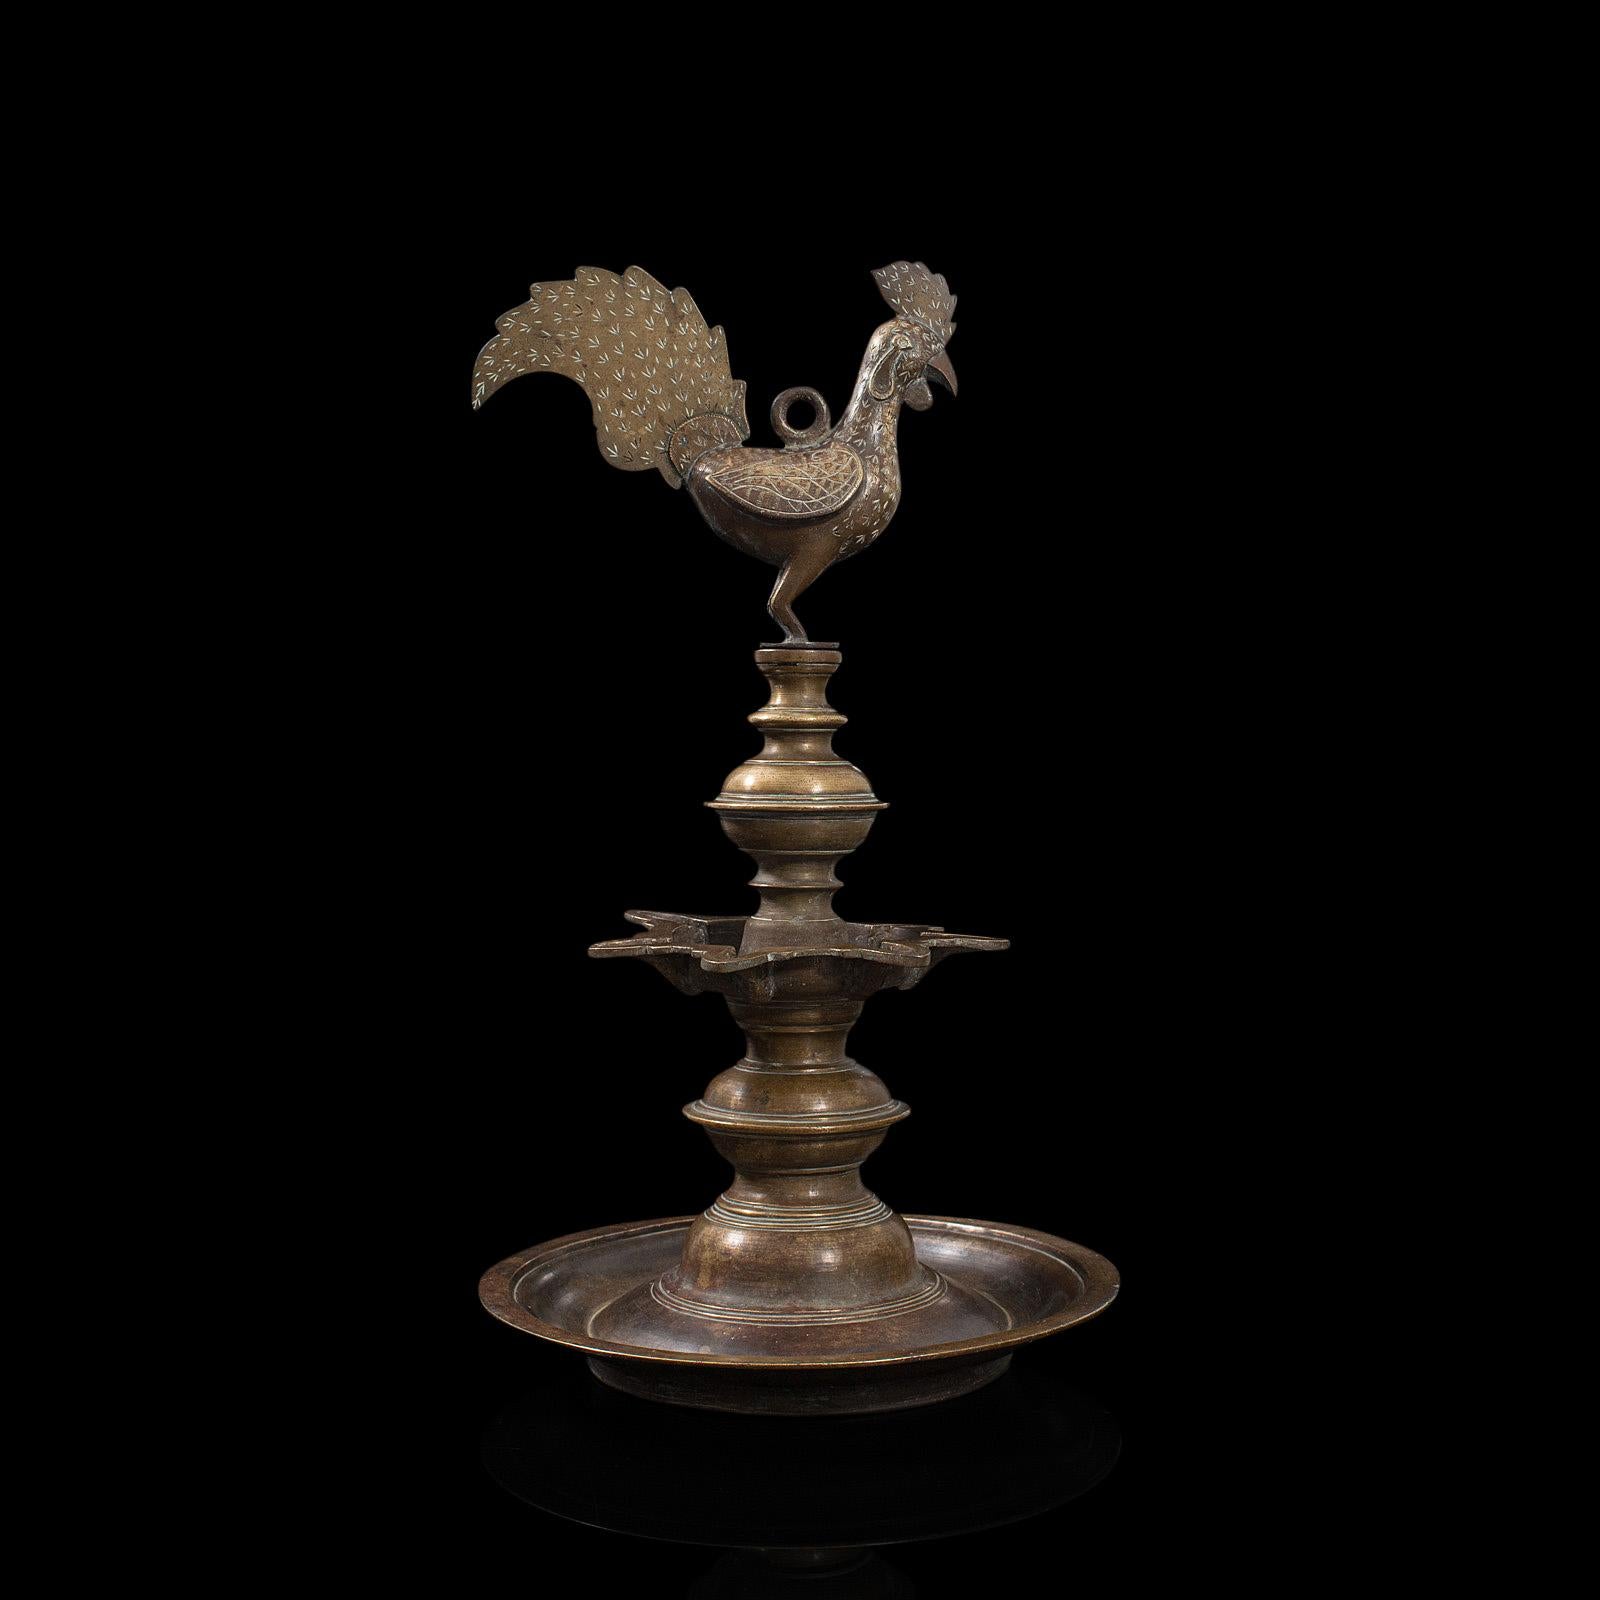 This is an antique Deccan oil lamp. An Indian, bronze hanging lamp with Hamsa bird finial, dating to the late 19th century, circa 1900.

Hanging lamps are commonly found in temple sanctuaries
Displaying a desirable aged patina and in good